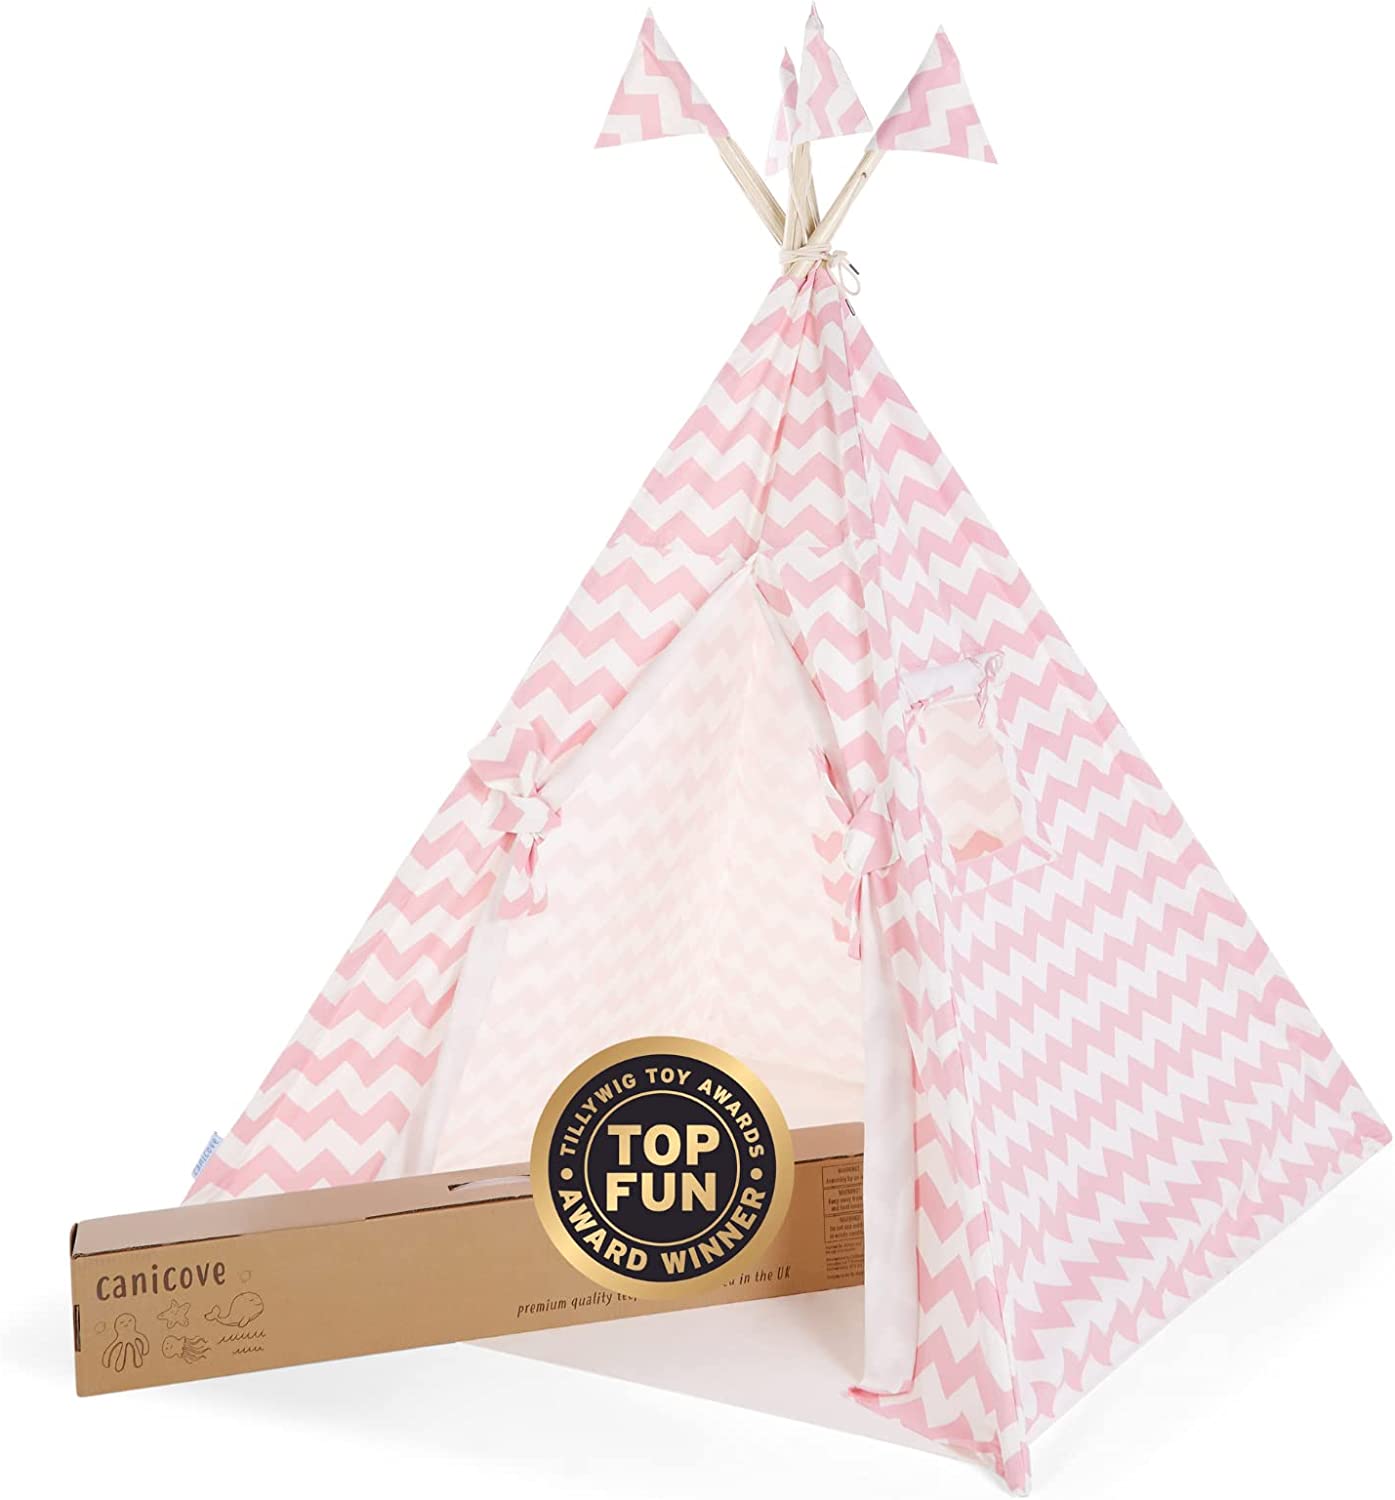 TotsAhoy Children Teepees Pink stipes Canicove Teepee Tent for Kids